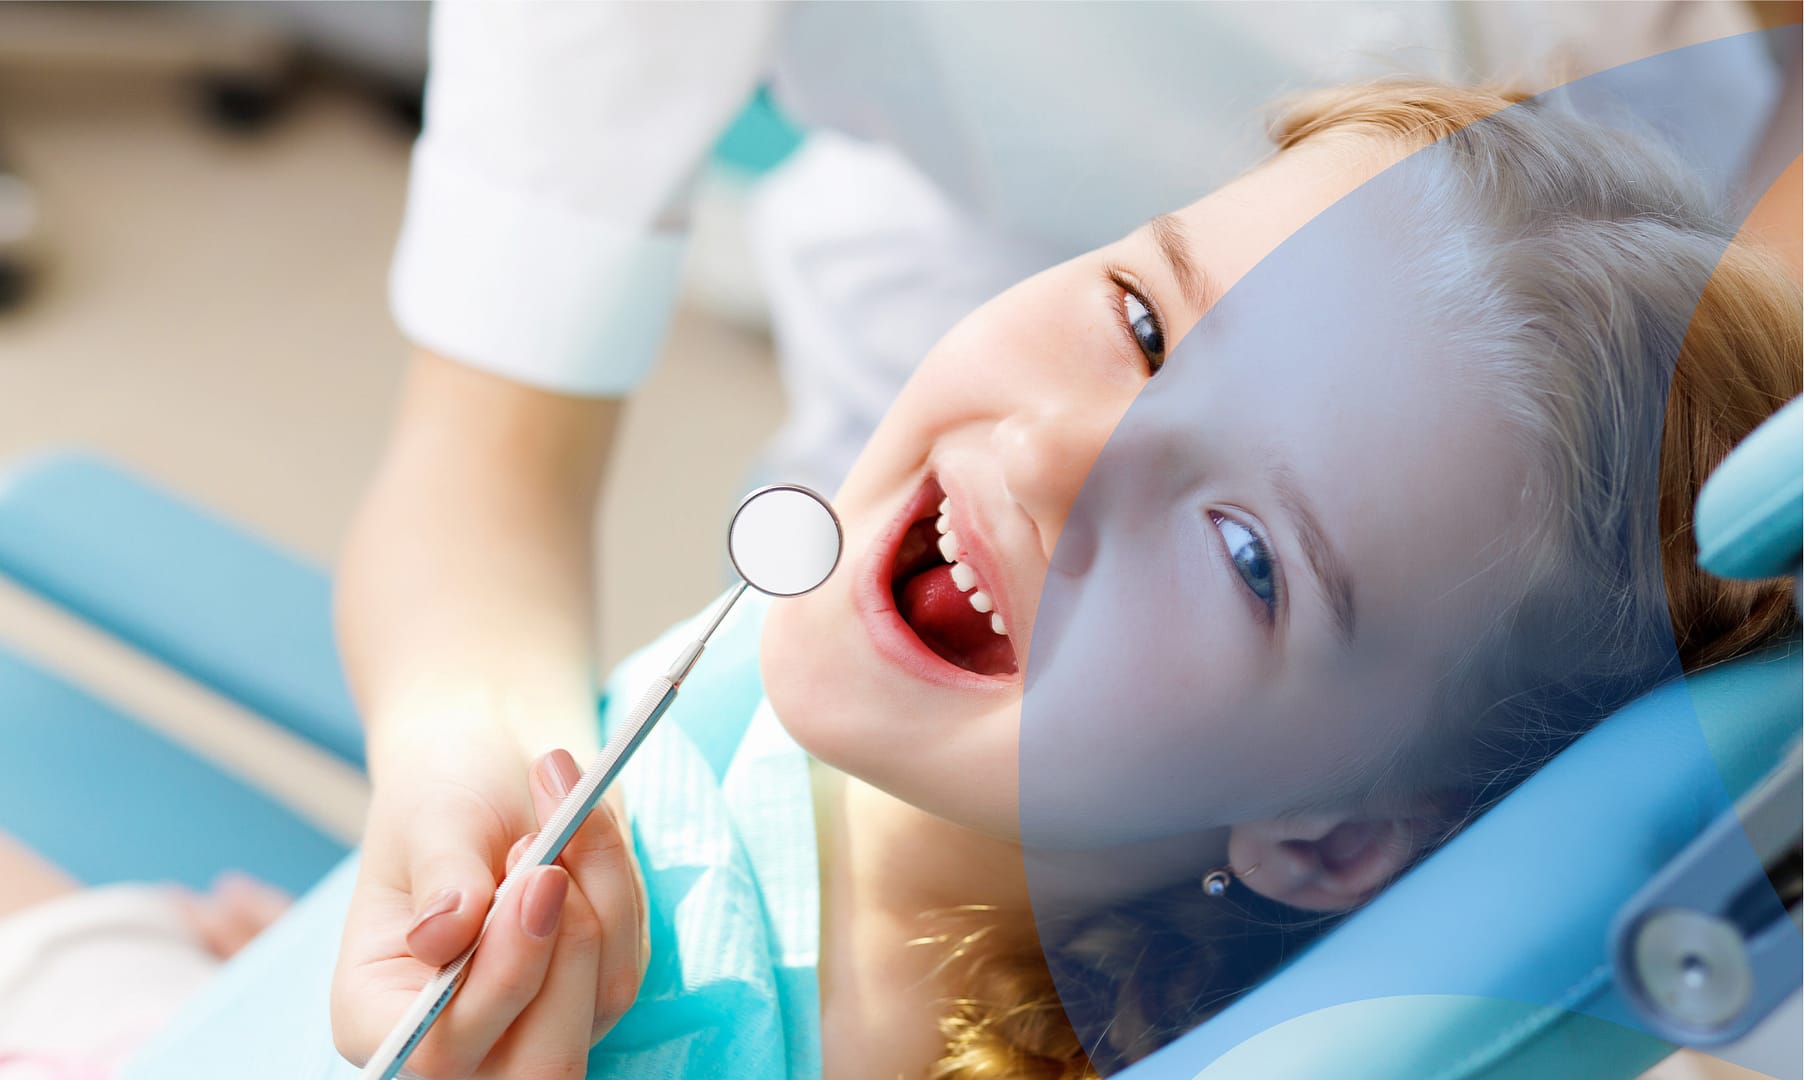 Lasers can help reduce dental anxiety.